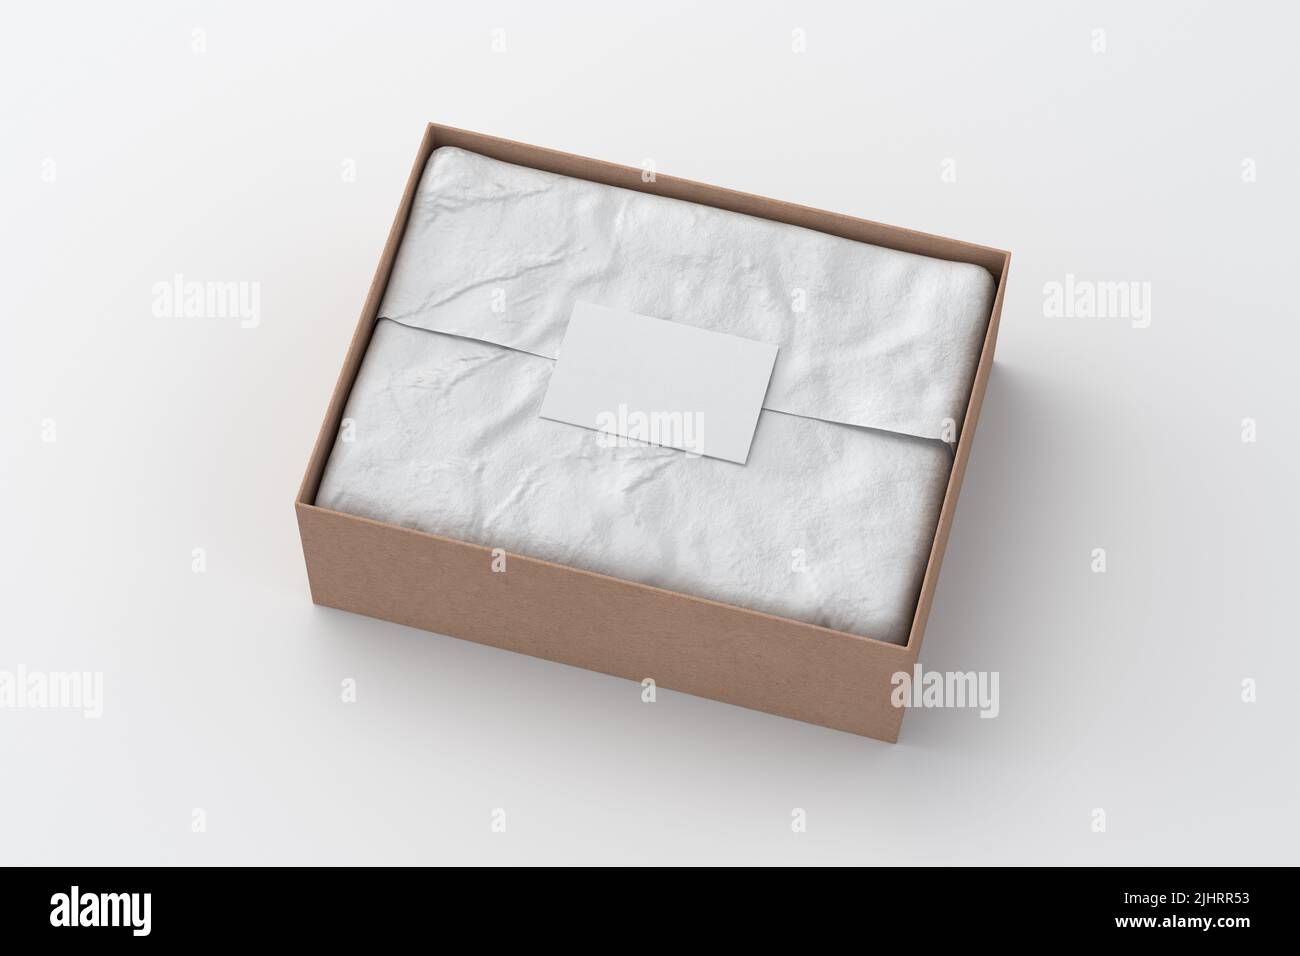 Gift box mock up. Cardboard gift box with blank label or business card on wrapping paper. White background. Side view. 3d illustration Stock Photo